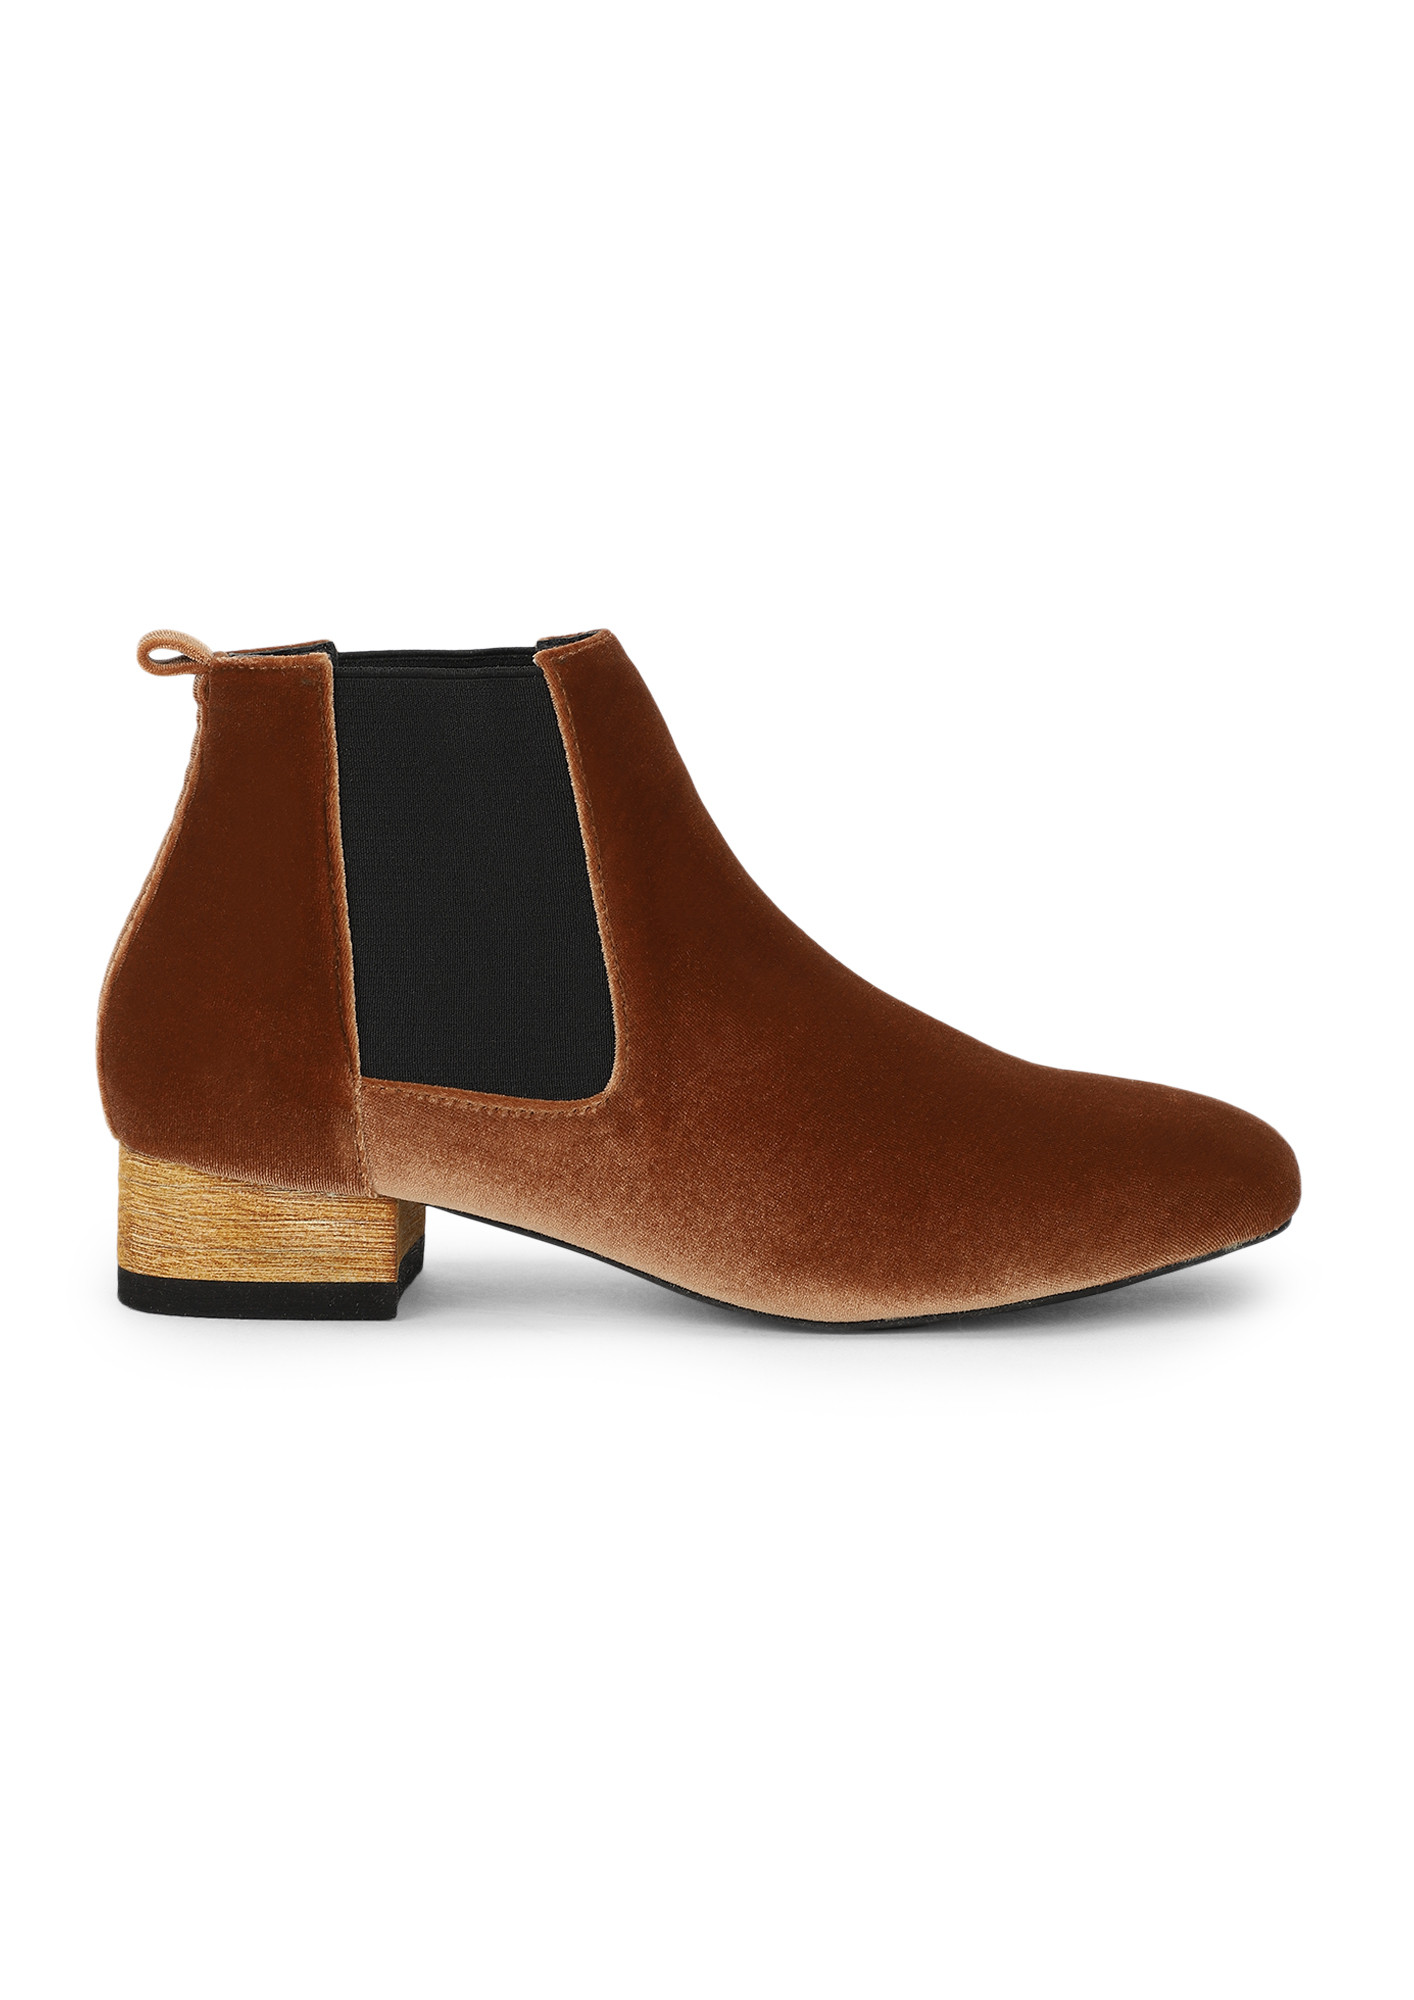 OFF YOU GO BROWN CHELSEA BOOTS